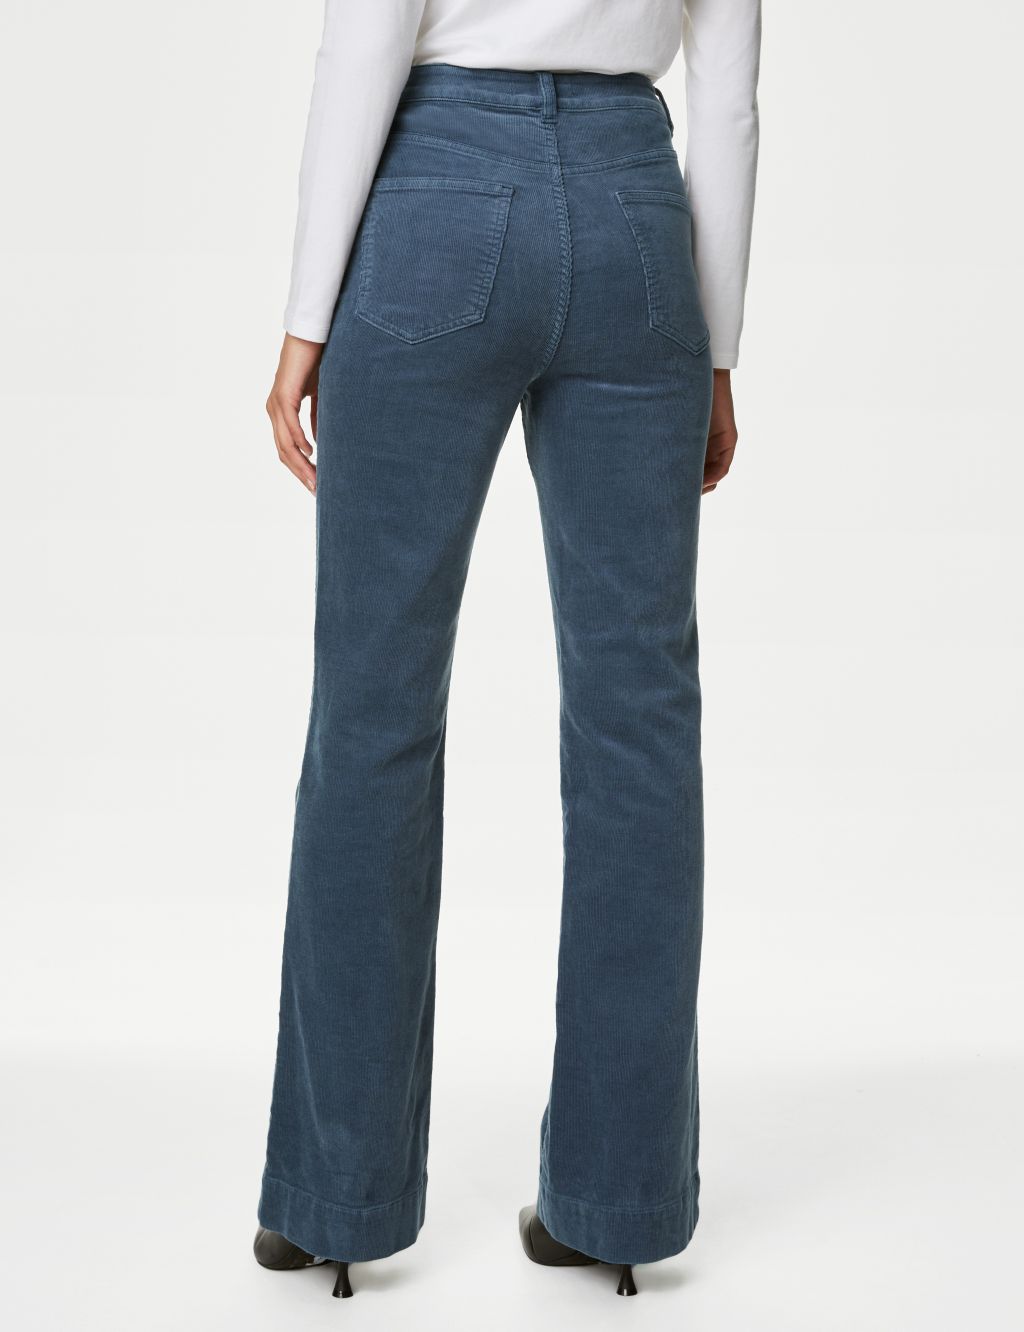 Women’s Flared Trousers | M&S